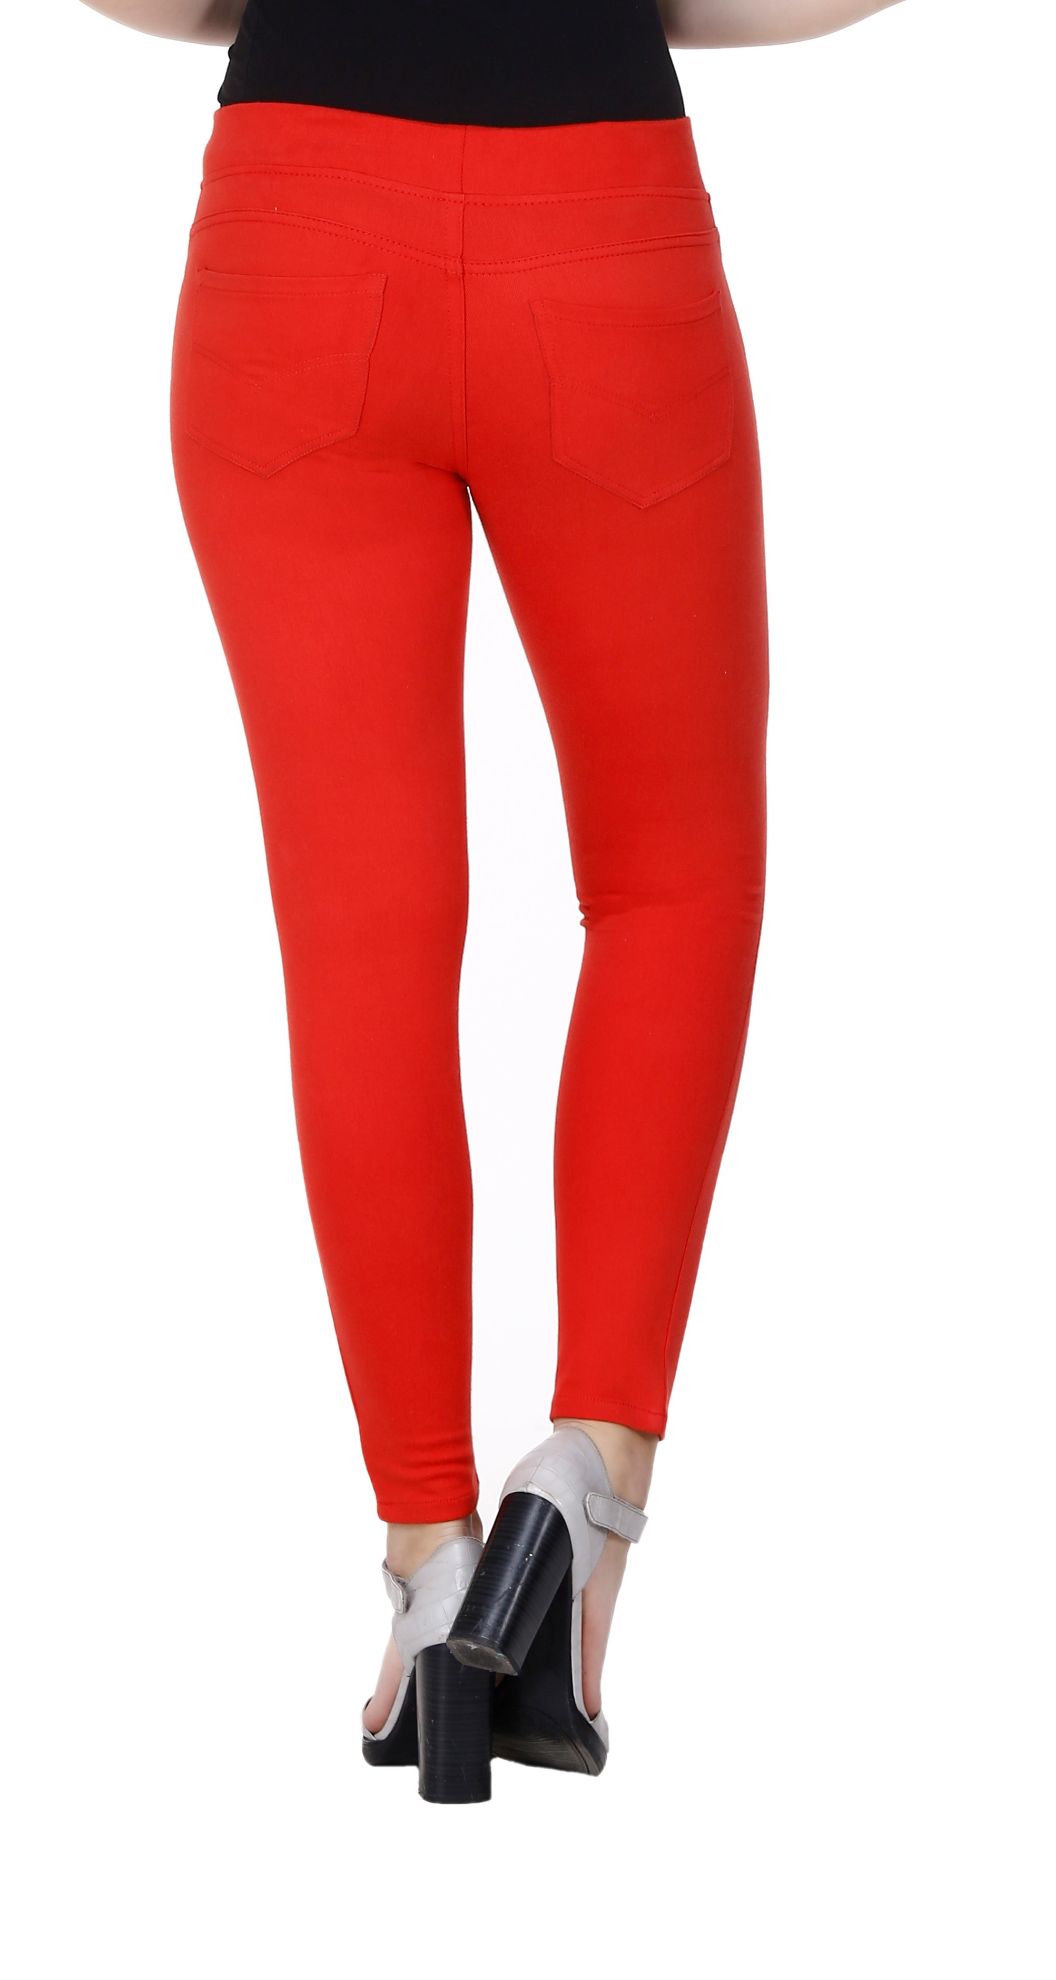 Frenchtrendz  Buy Frenchtrendz Cotton Viscose Spandex Red Jeggings Online